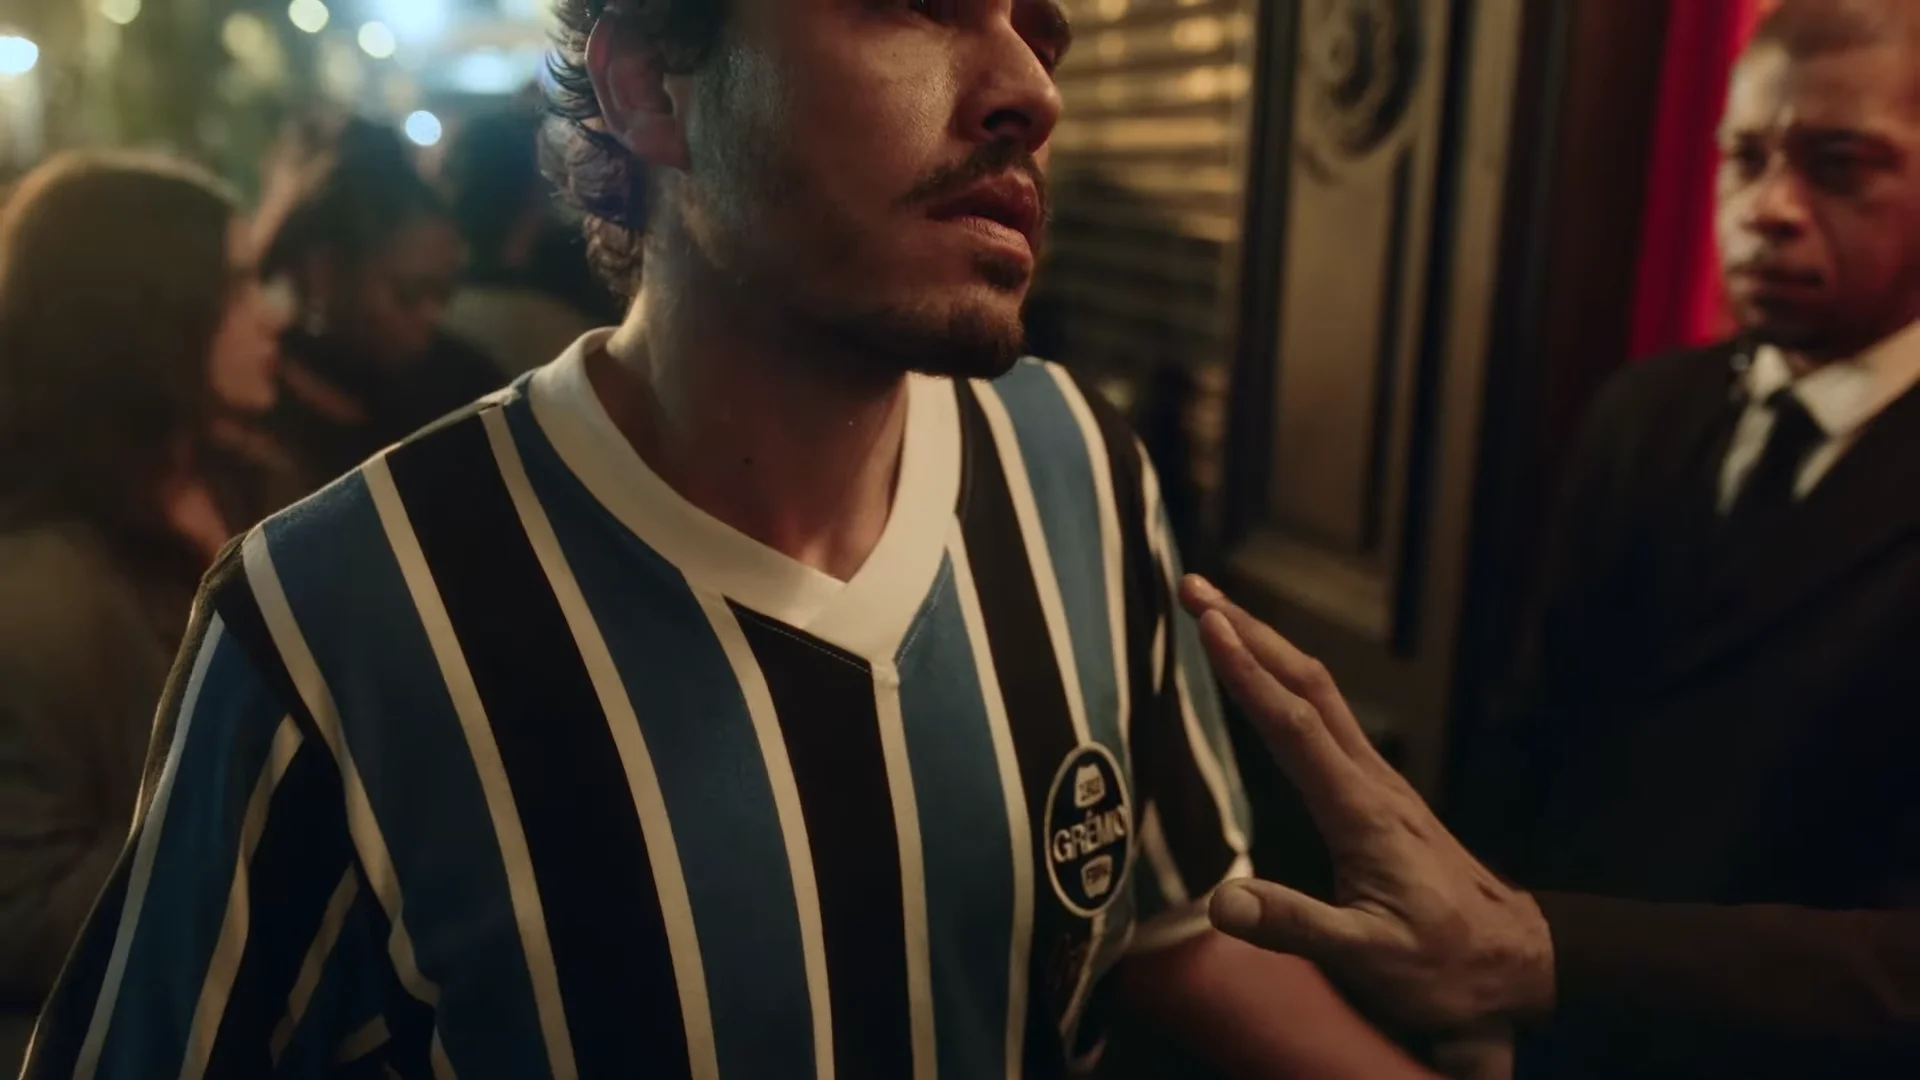 Alfaiataria Brahma: camisas de times na moda. Man in blue and white striped soccer jersey in a busy bar with a bouncer in the background.